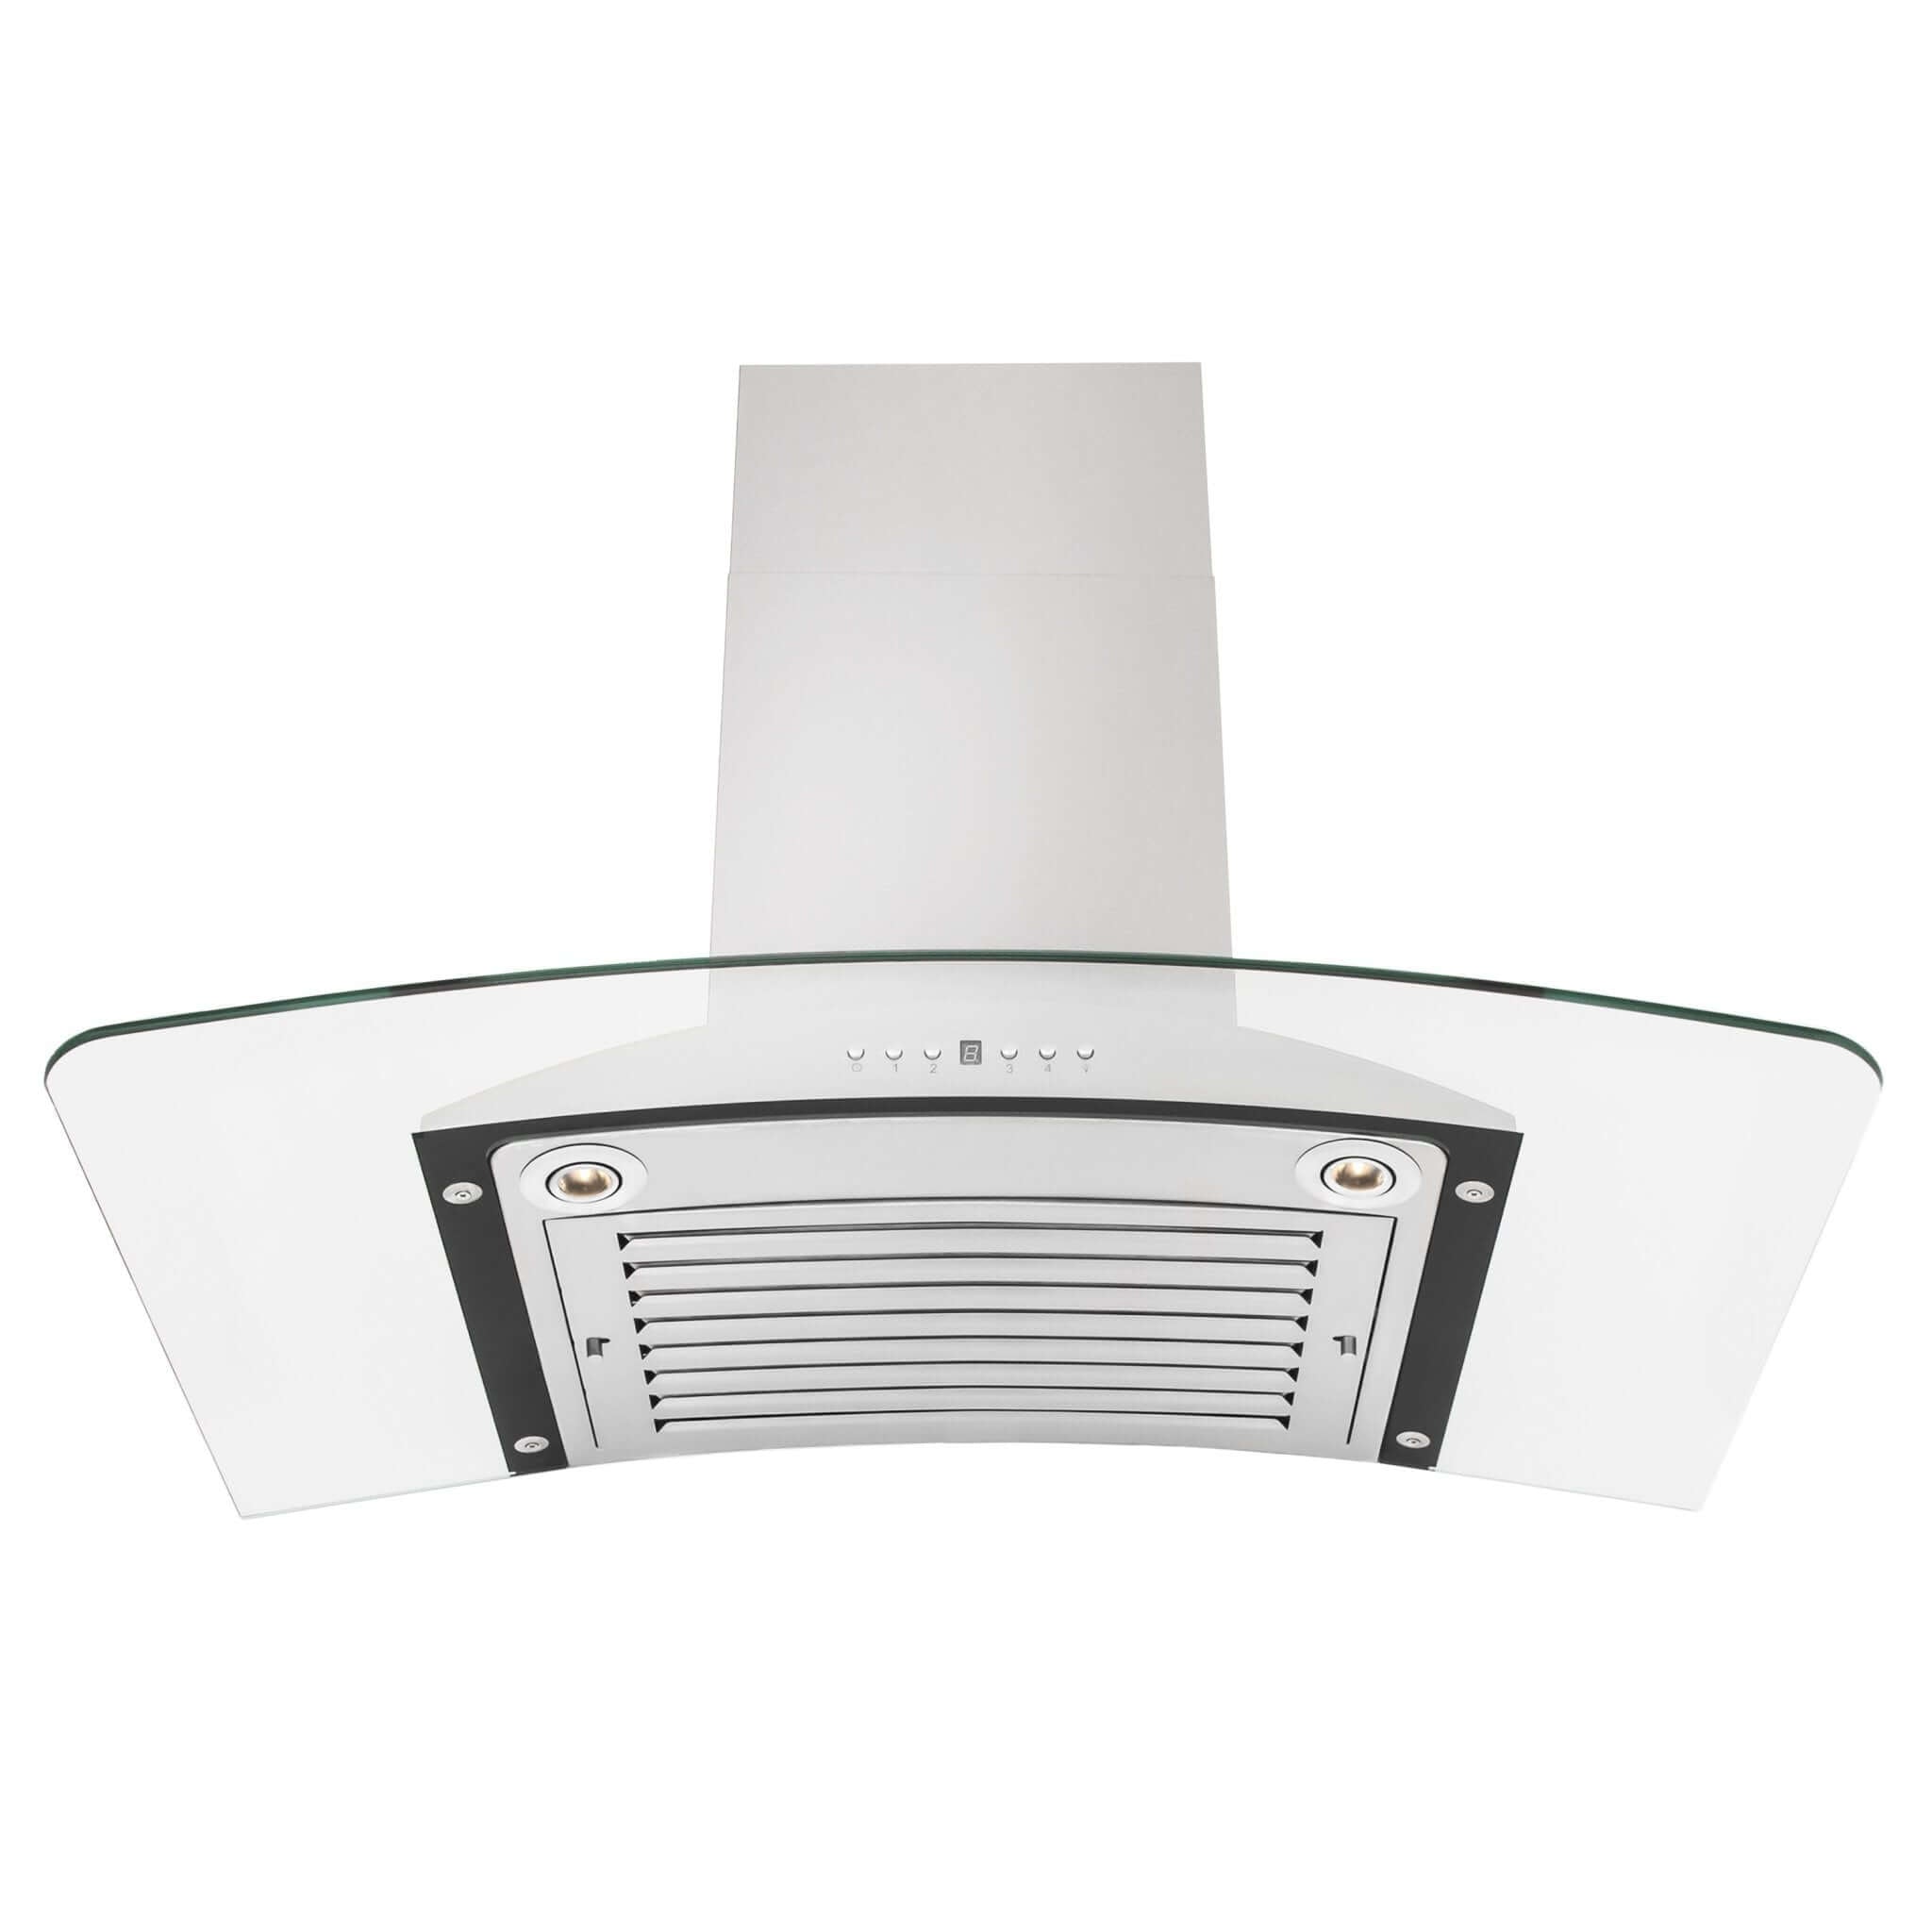 ZLINE Wall Mount Range Hood in Stainless Steel with Glass Canopy (KN)